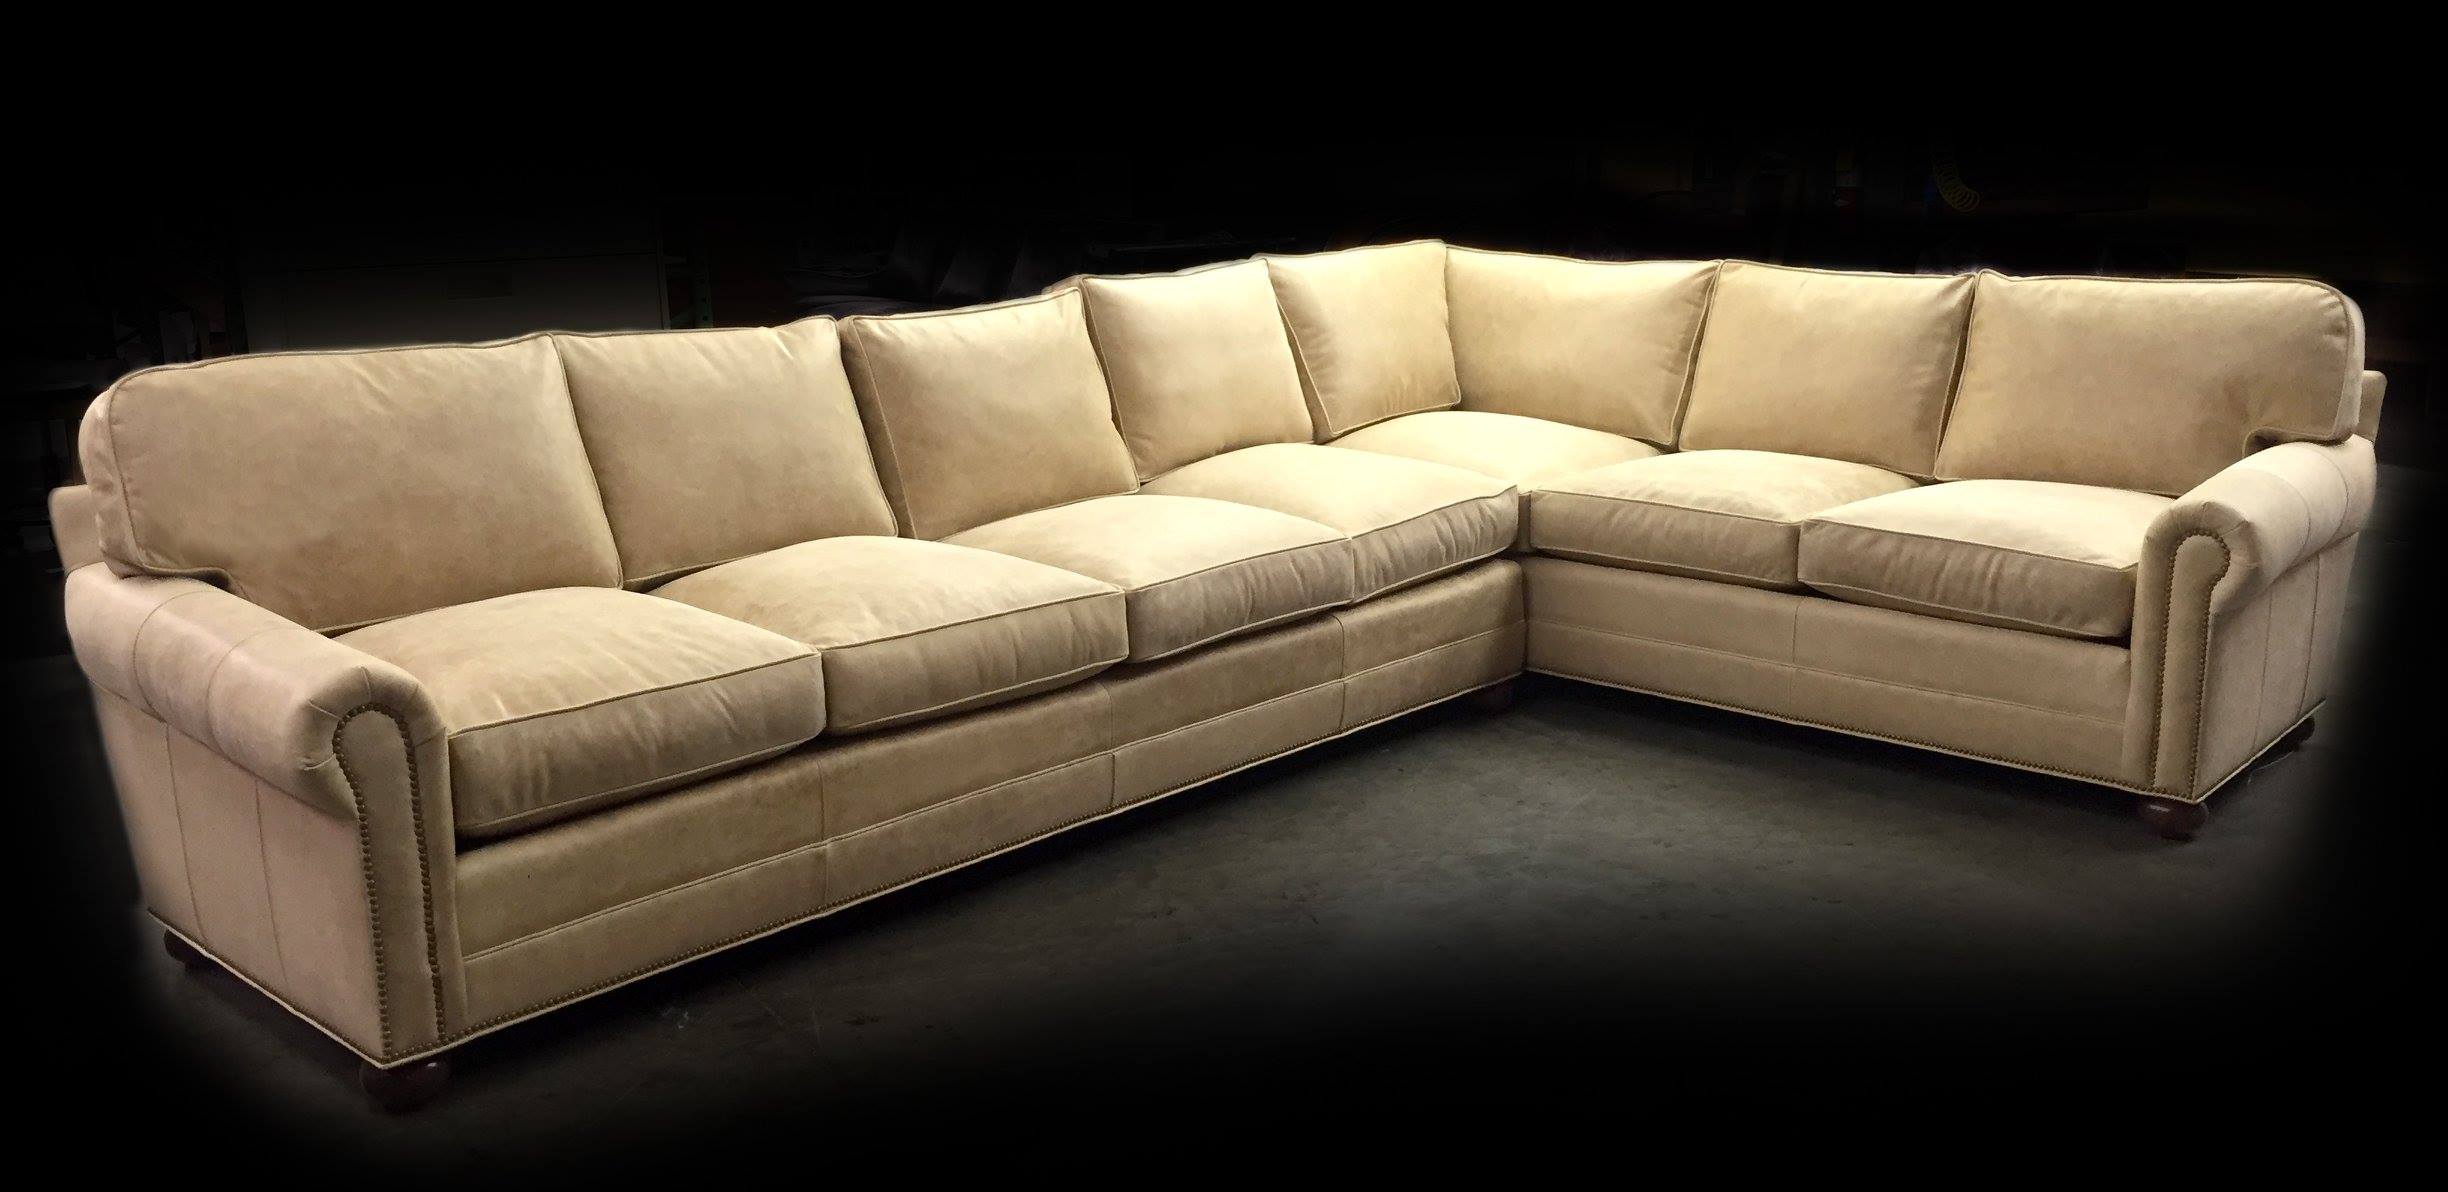 Cream Colored Leather Roosevelt Sectional